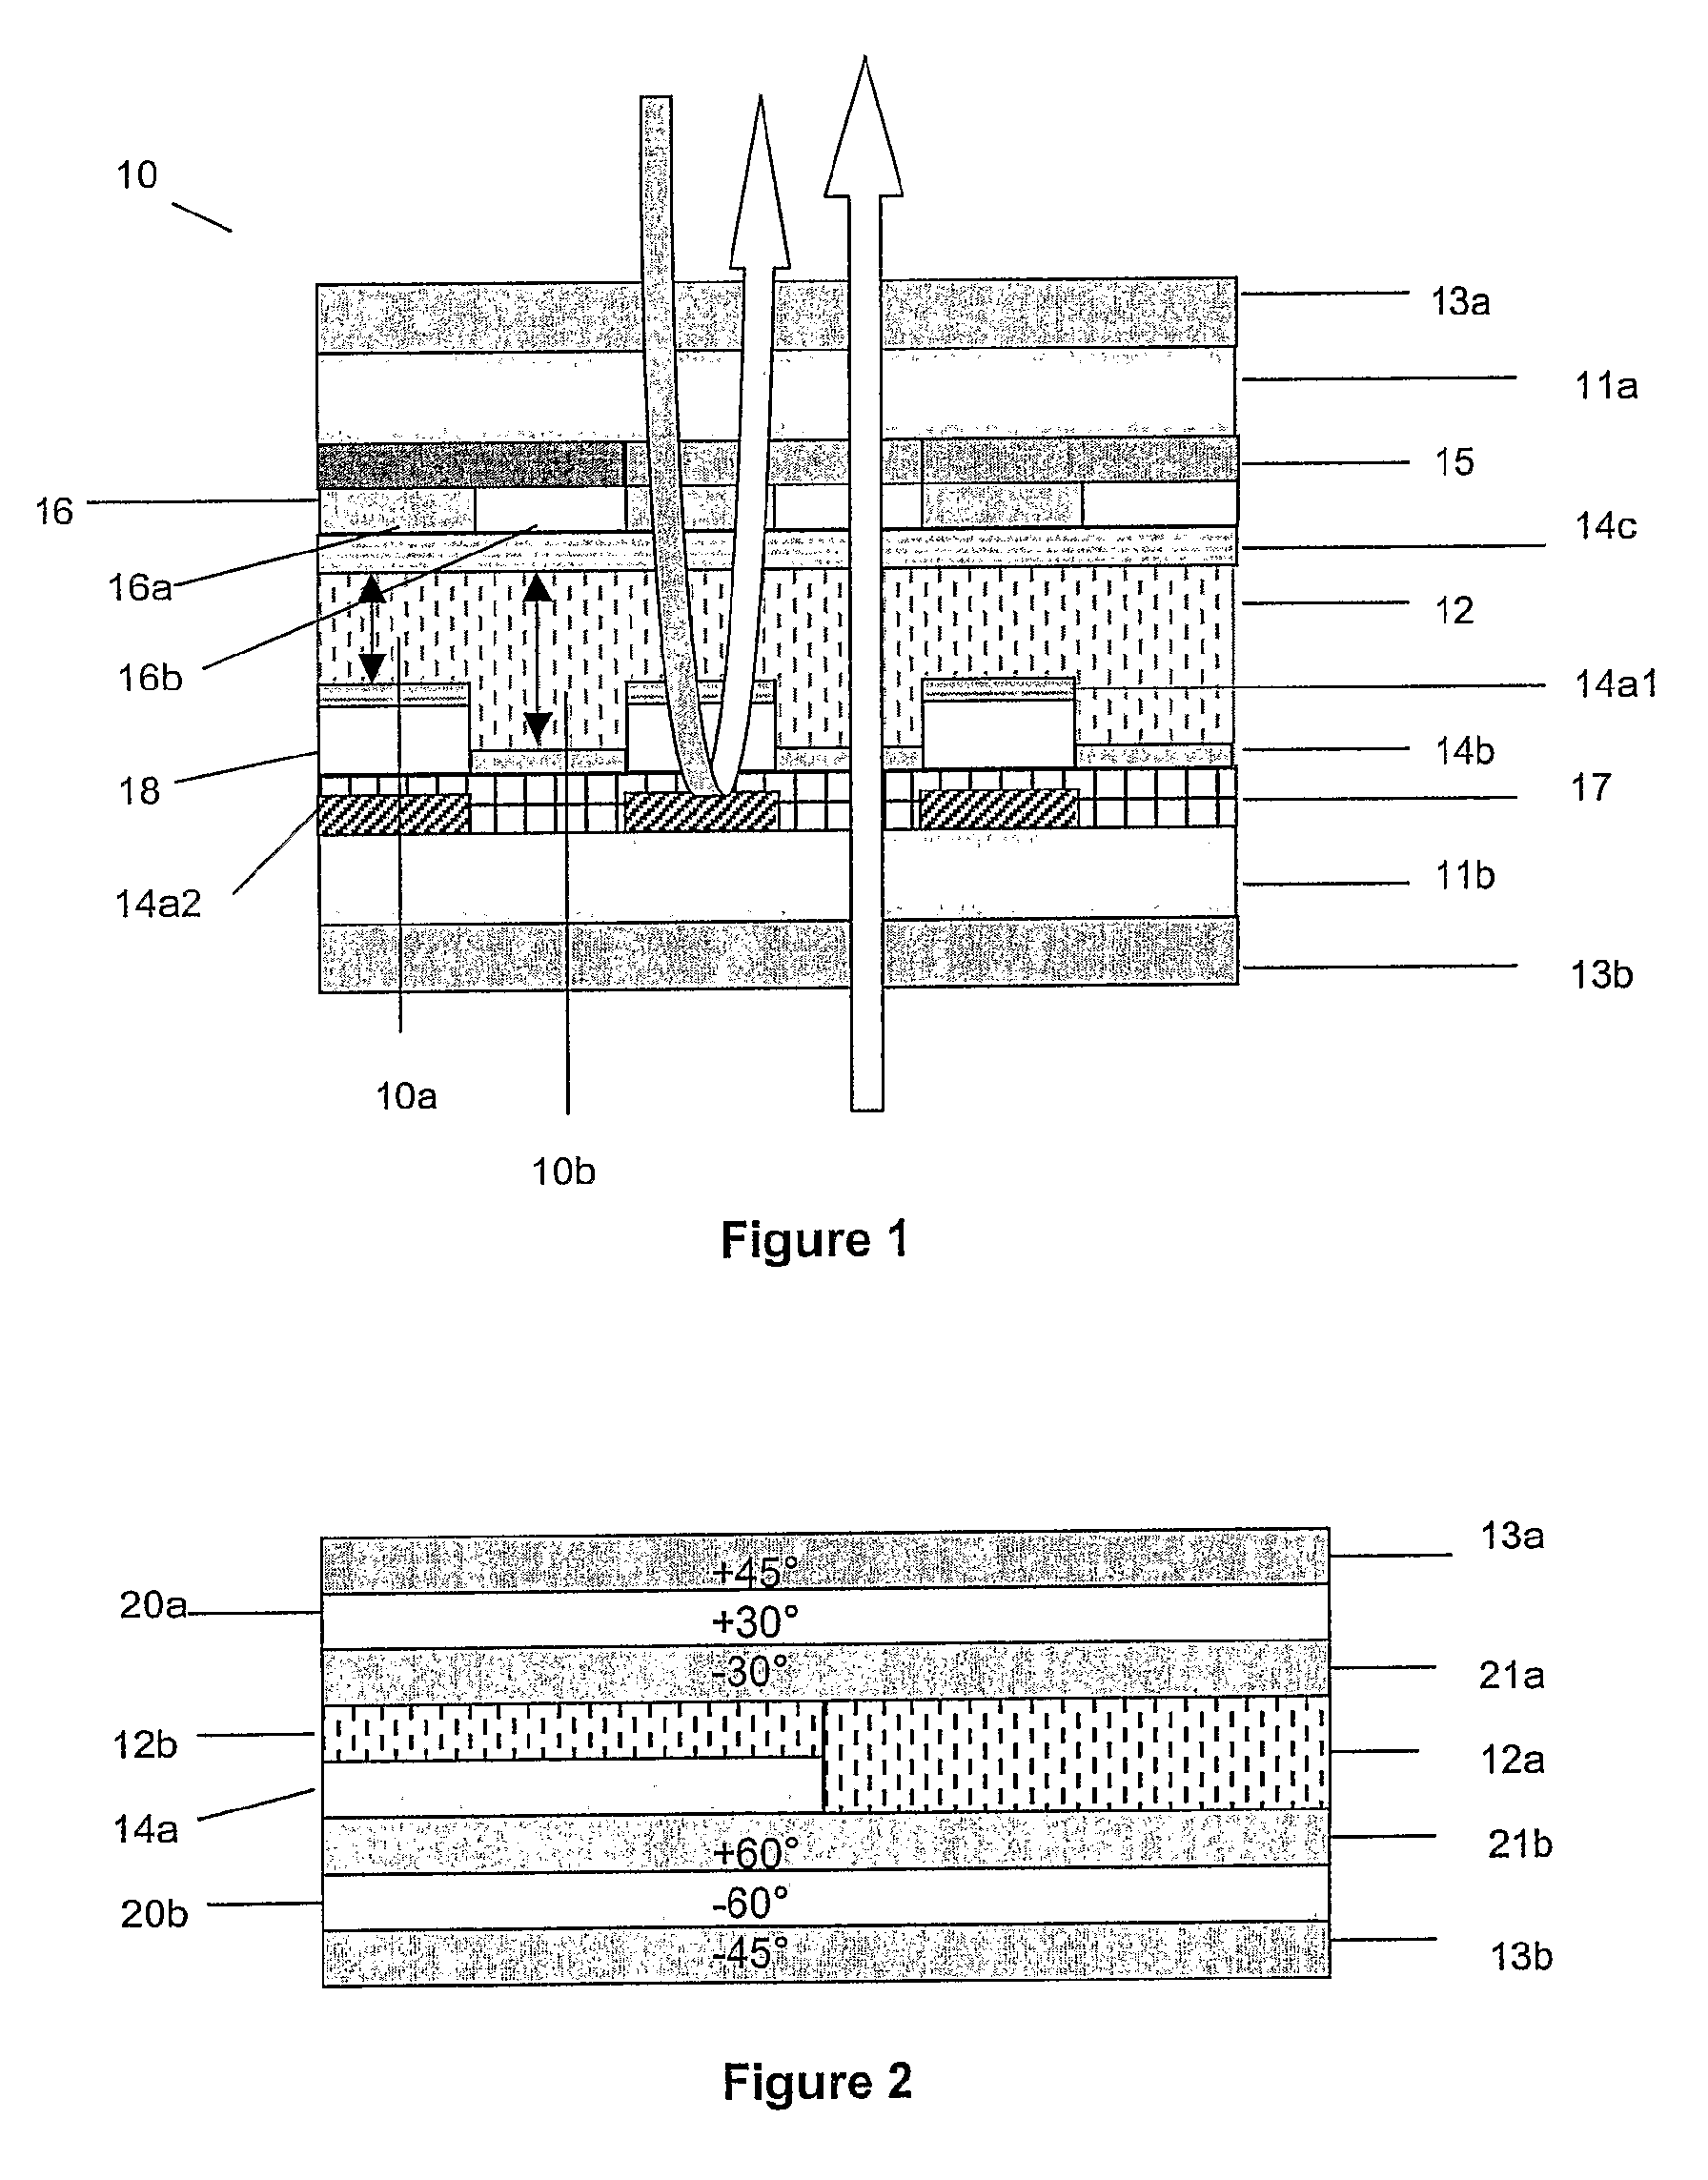 Transflective vertically aligned liquid crystal display with in-cell patterned quarter-wave retarder